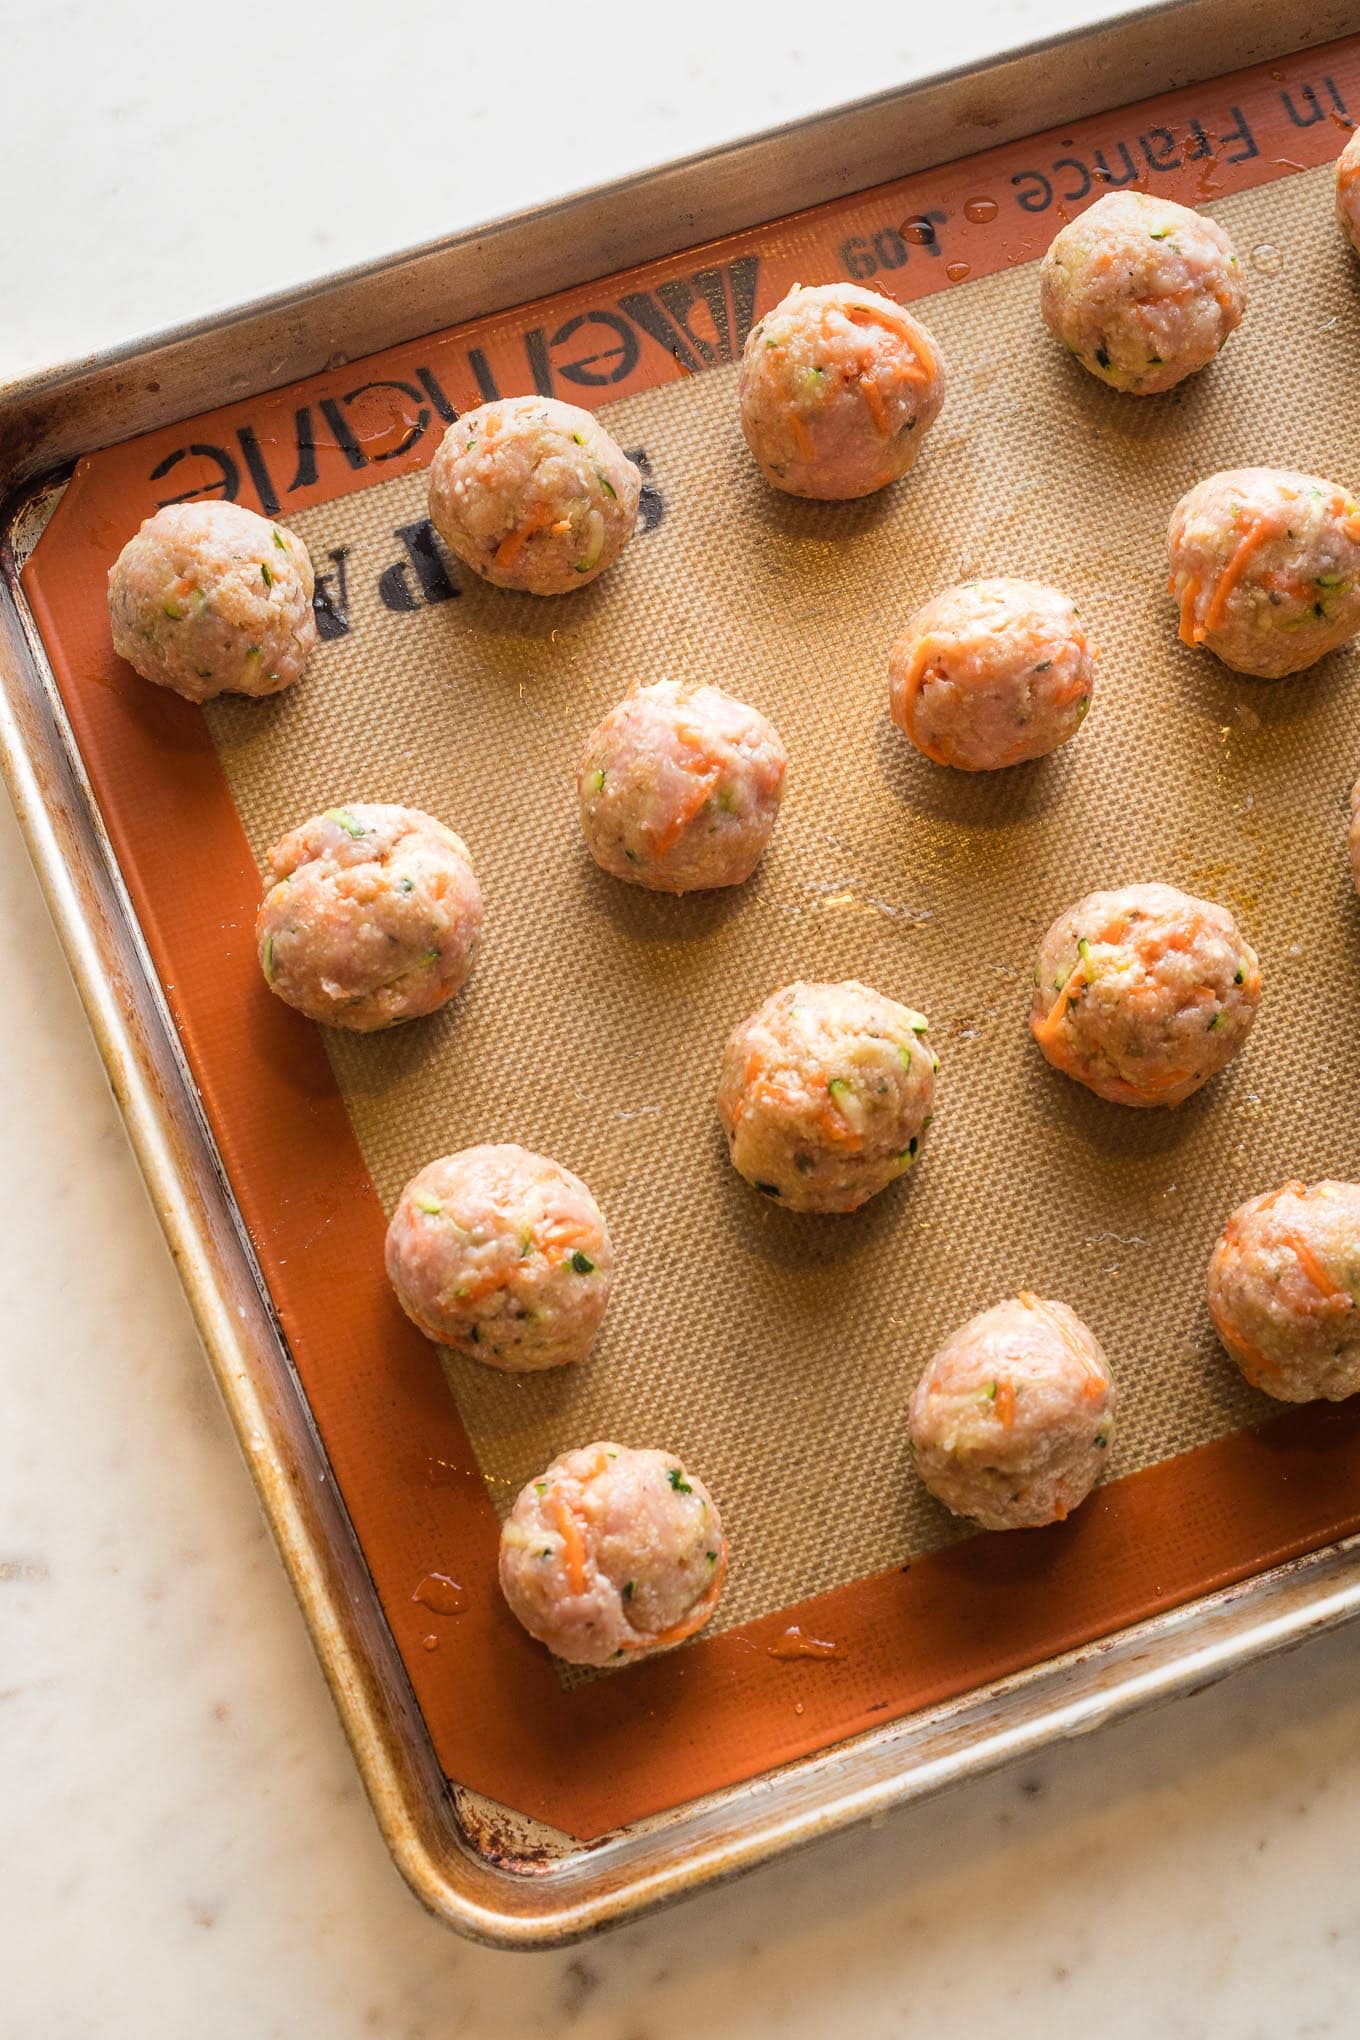 Meatball mixture portioned out and rolled into smooth balls, arranged on a baking tray ready to bake.